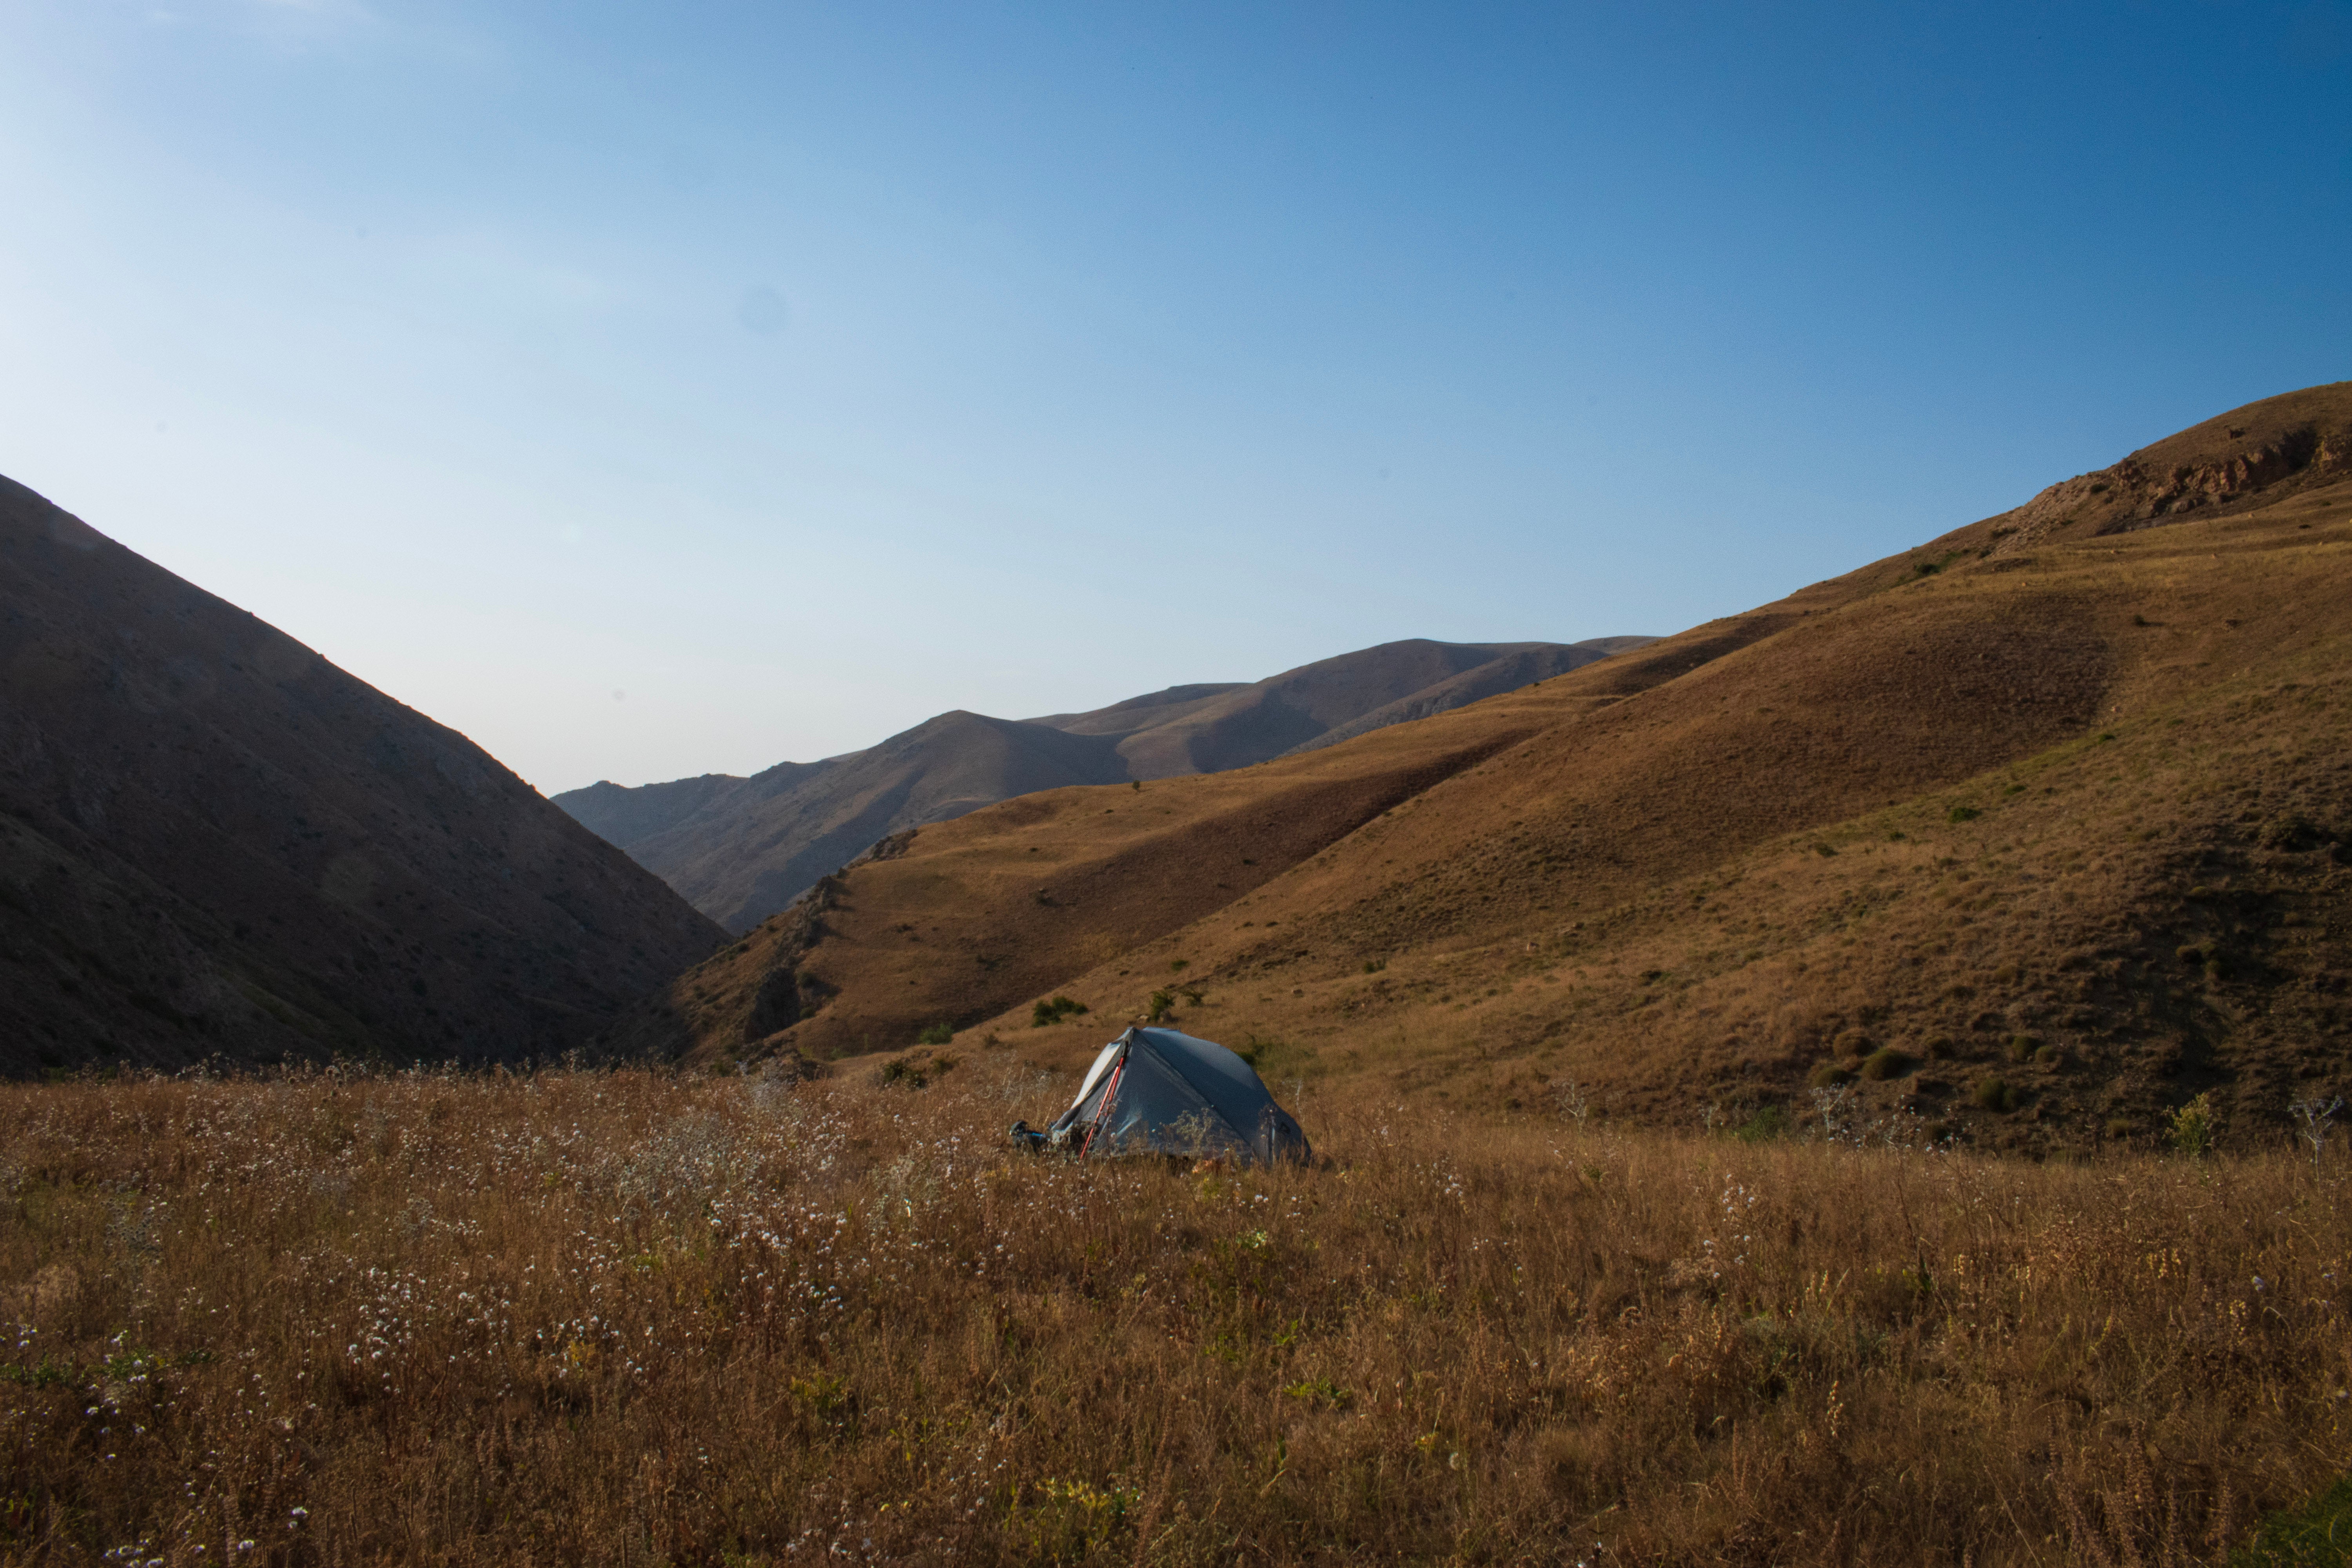 ‘I camped alone in bear country, just outside Gnishik in Vayots Dzor, Armenia’